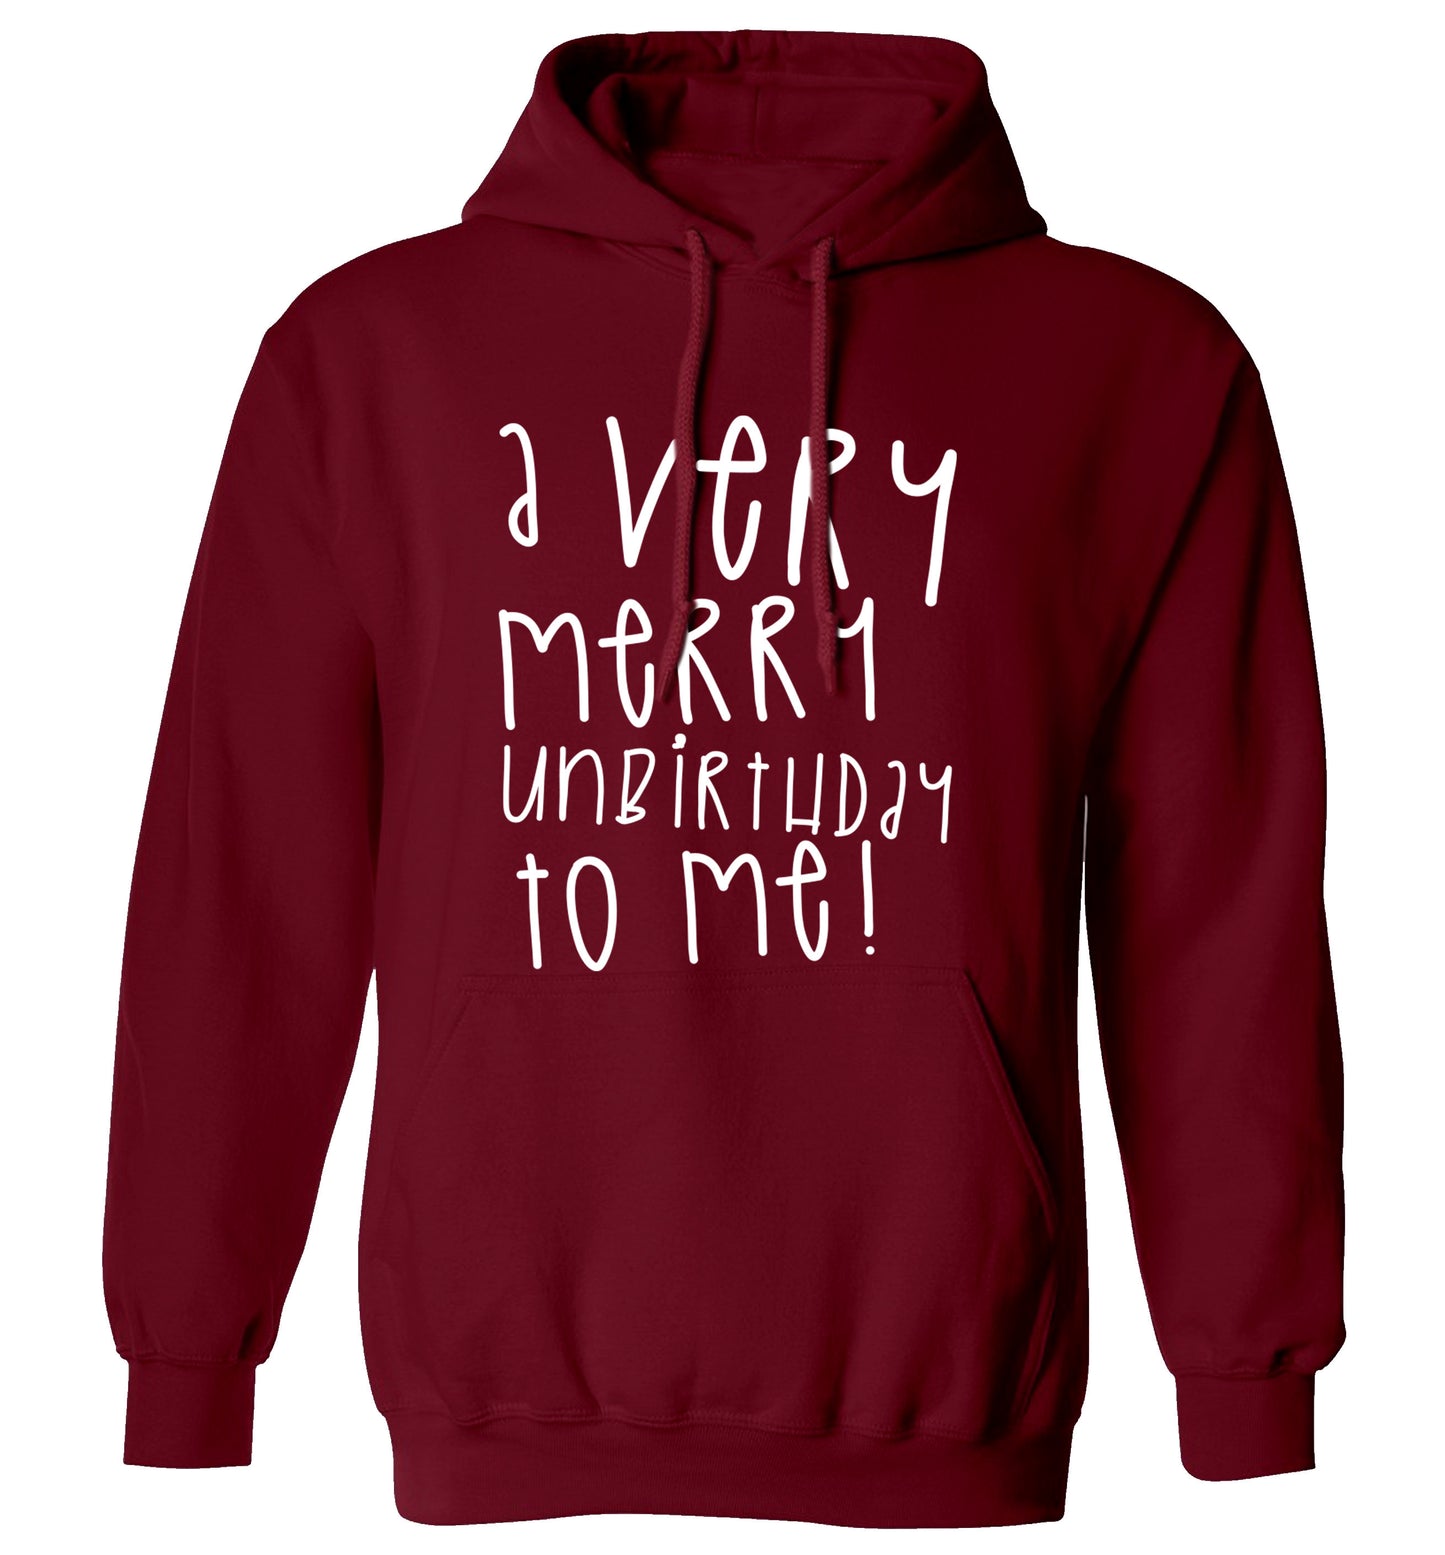 A very merry unbirthday to me! adults unisex maroon hoodie 2XL